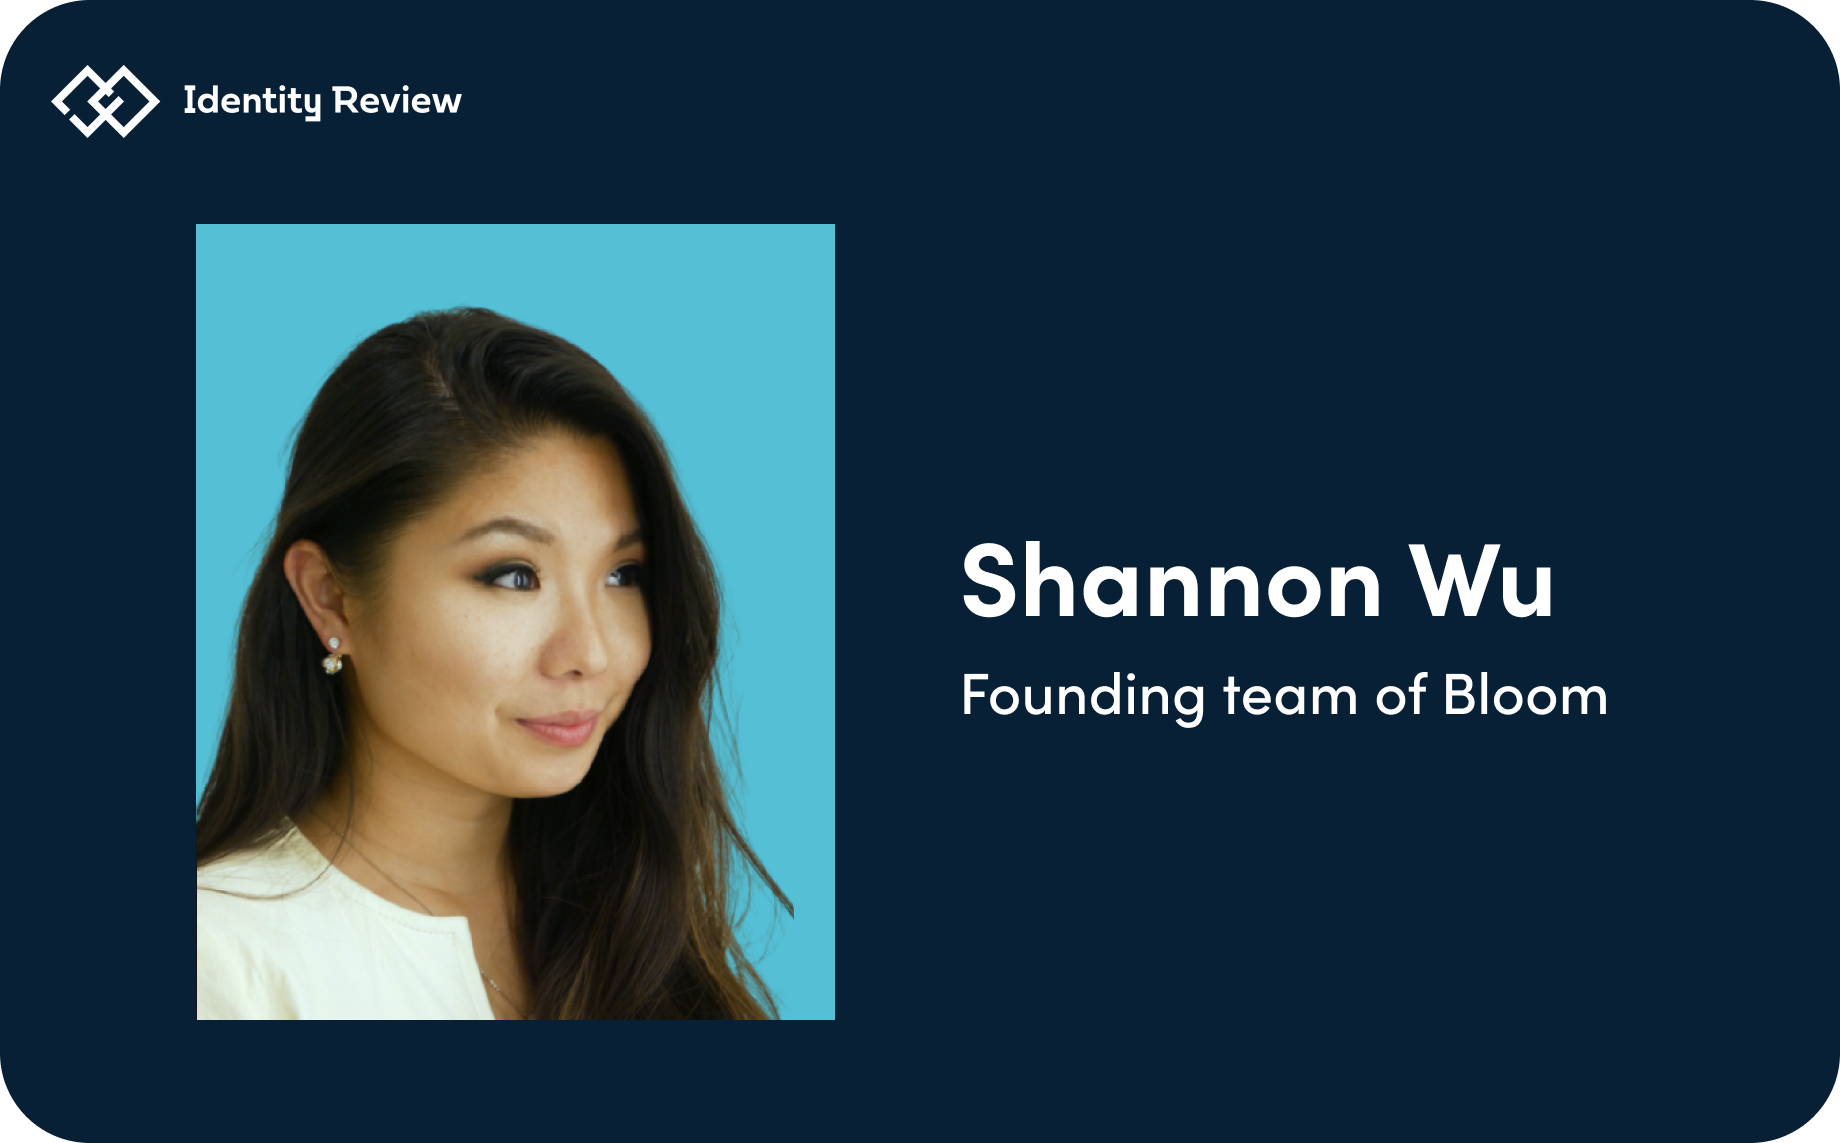 3. Shannon Wu, founding team of Bloom